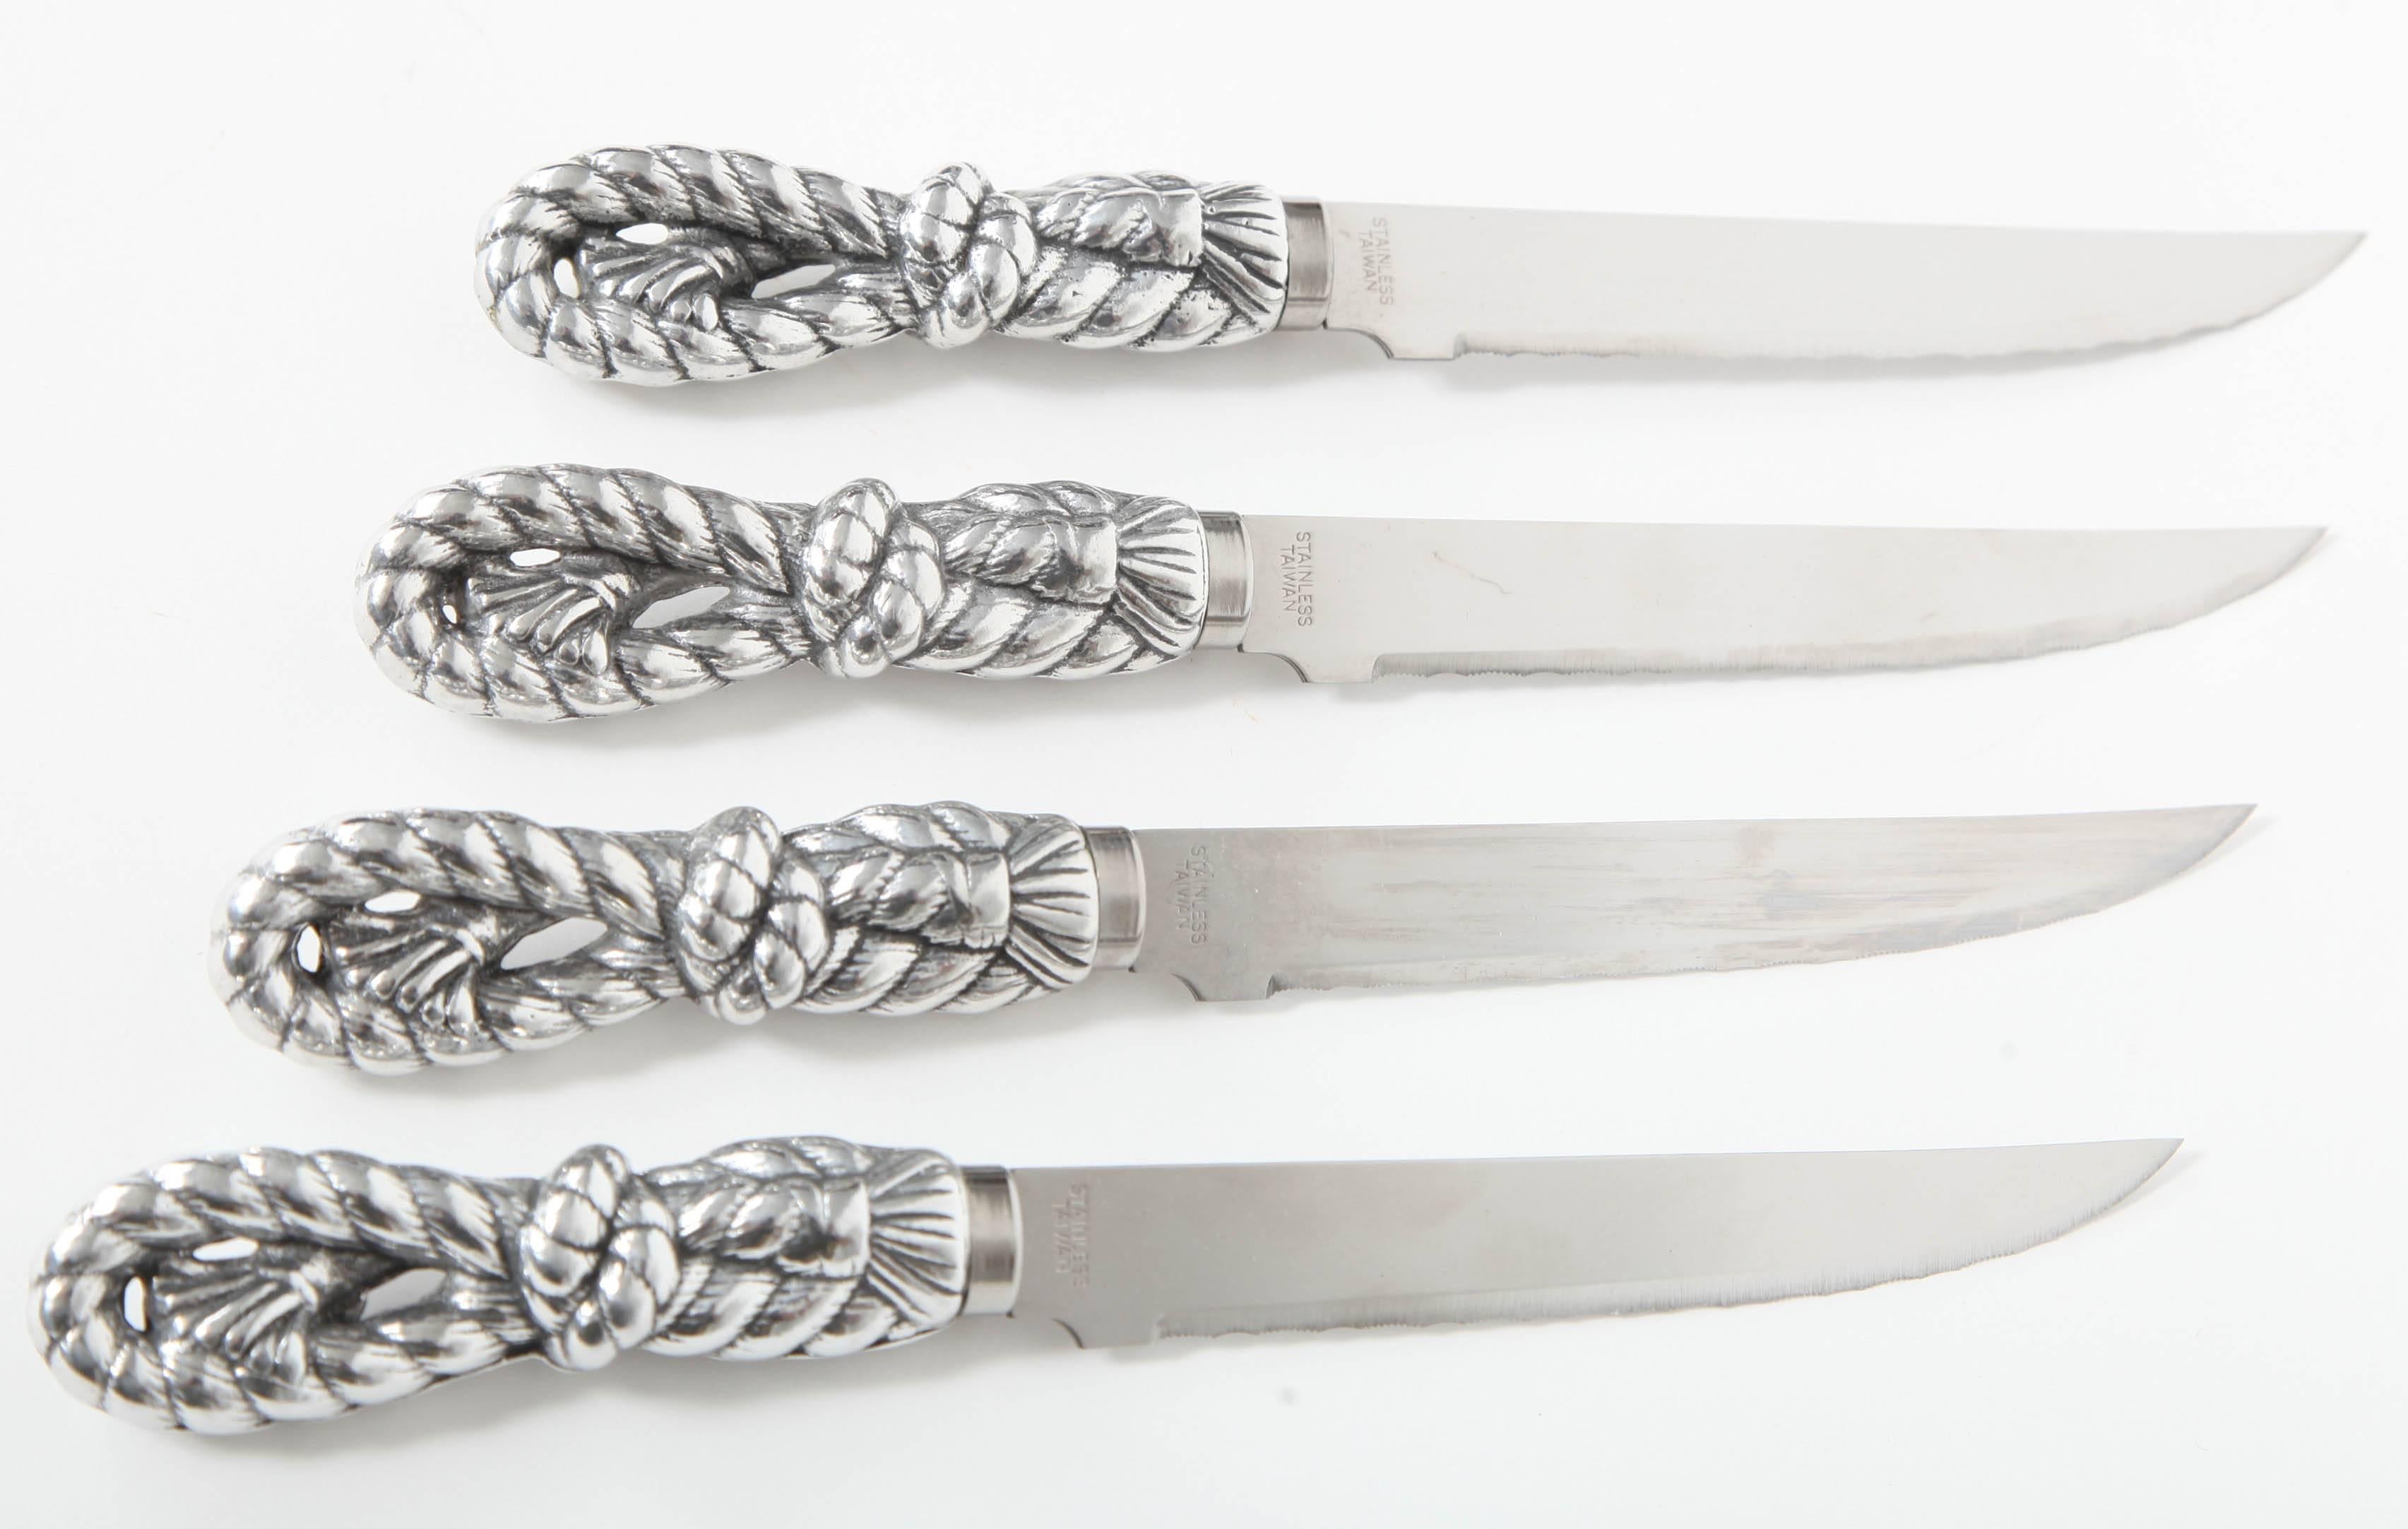 Steak knife set with heavy aluminum stylized braided tassel handles and serrated stainless blades. Like new condition....no wear on blades.